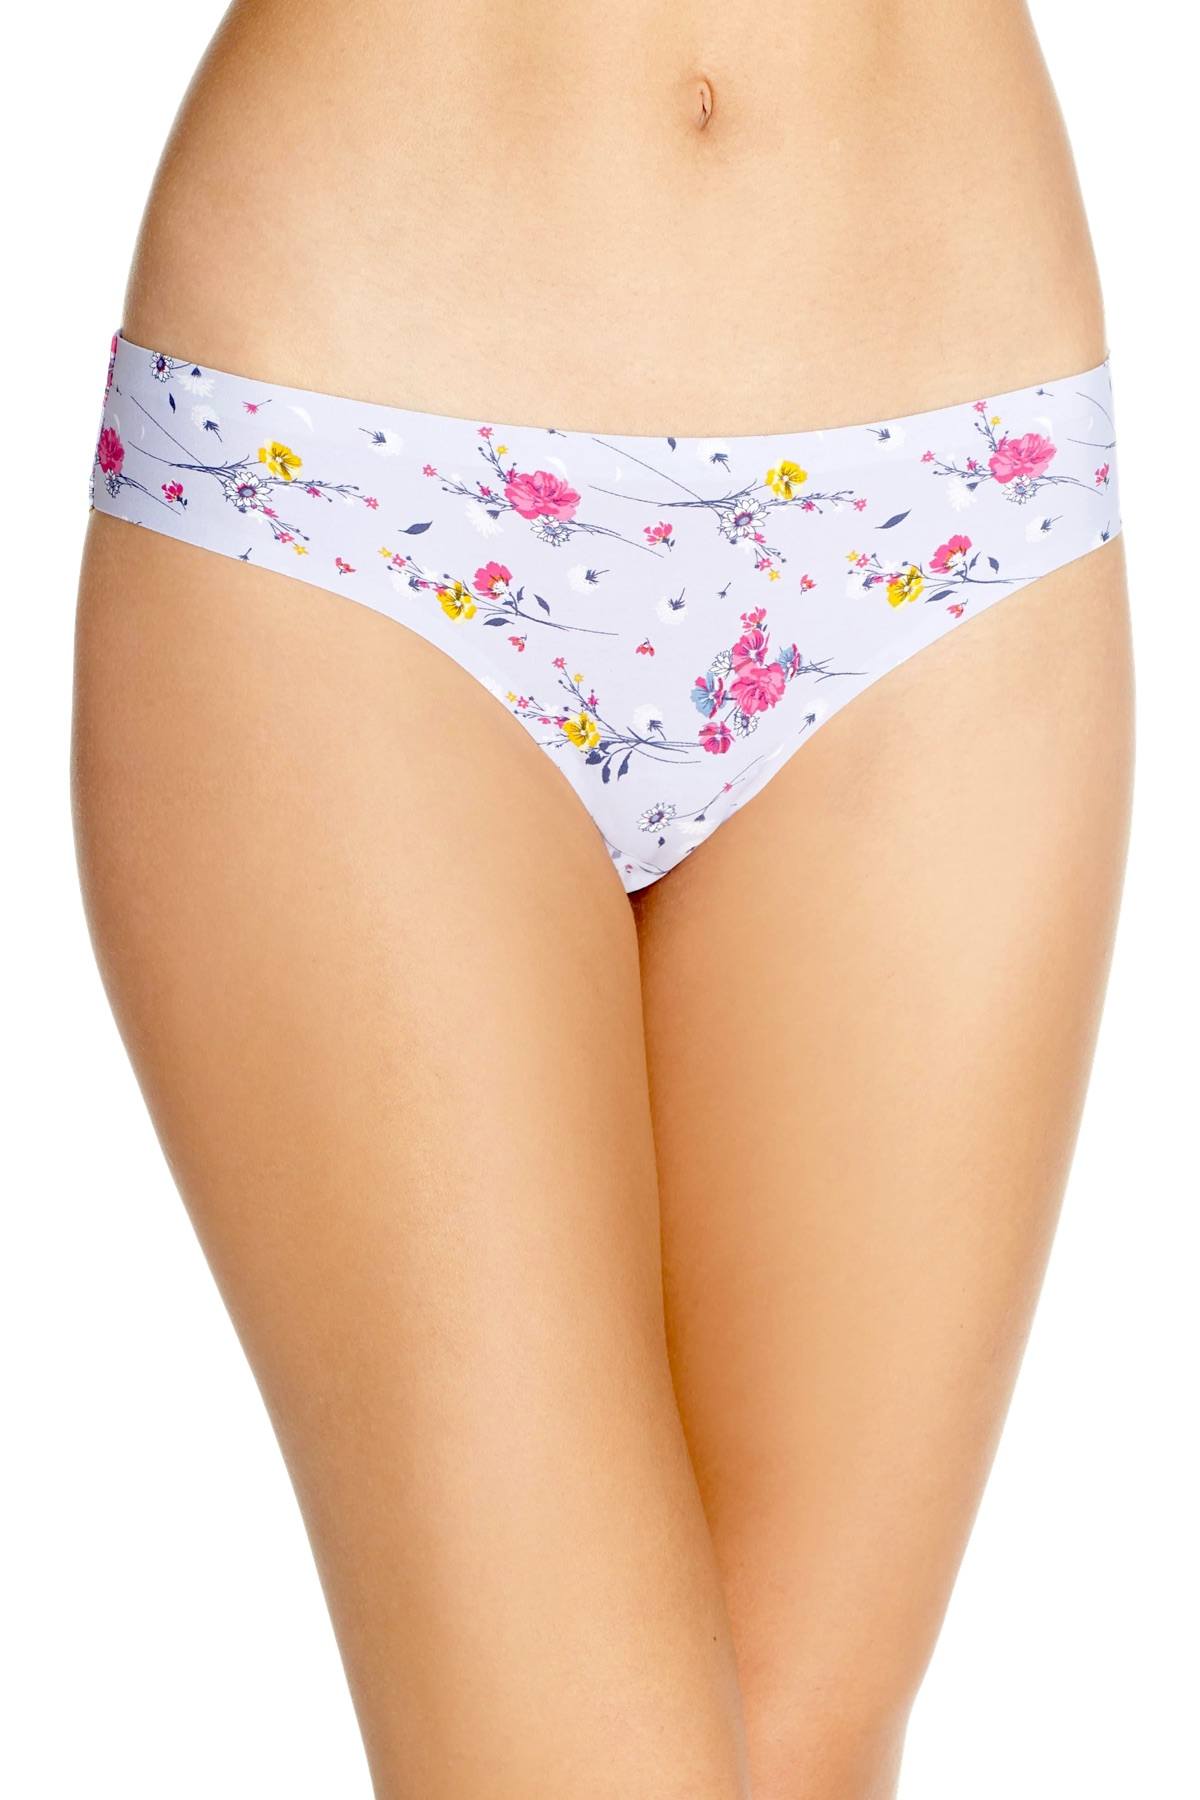 Honeydew Intimates Low Tide Floral Printed Skinz Hipster Brief